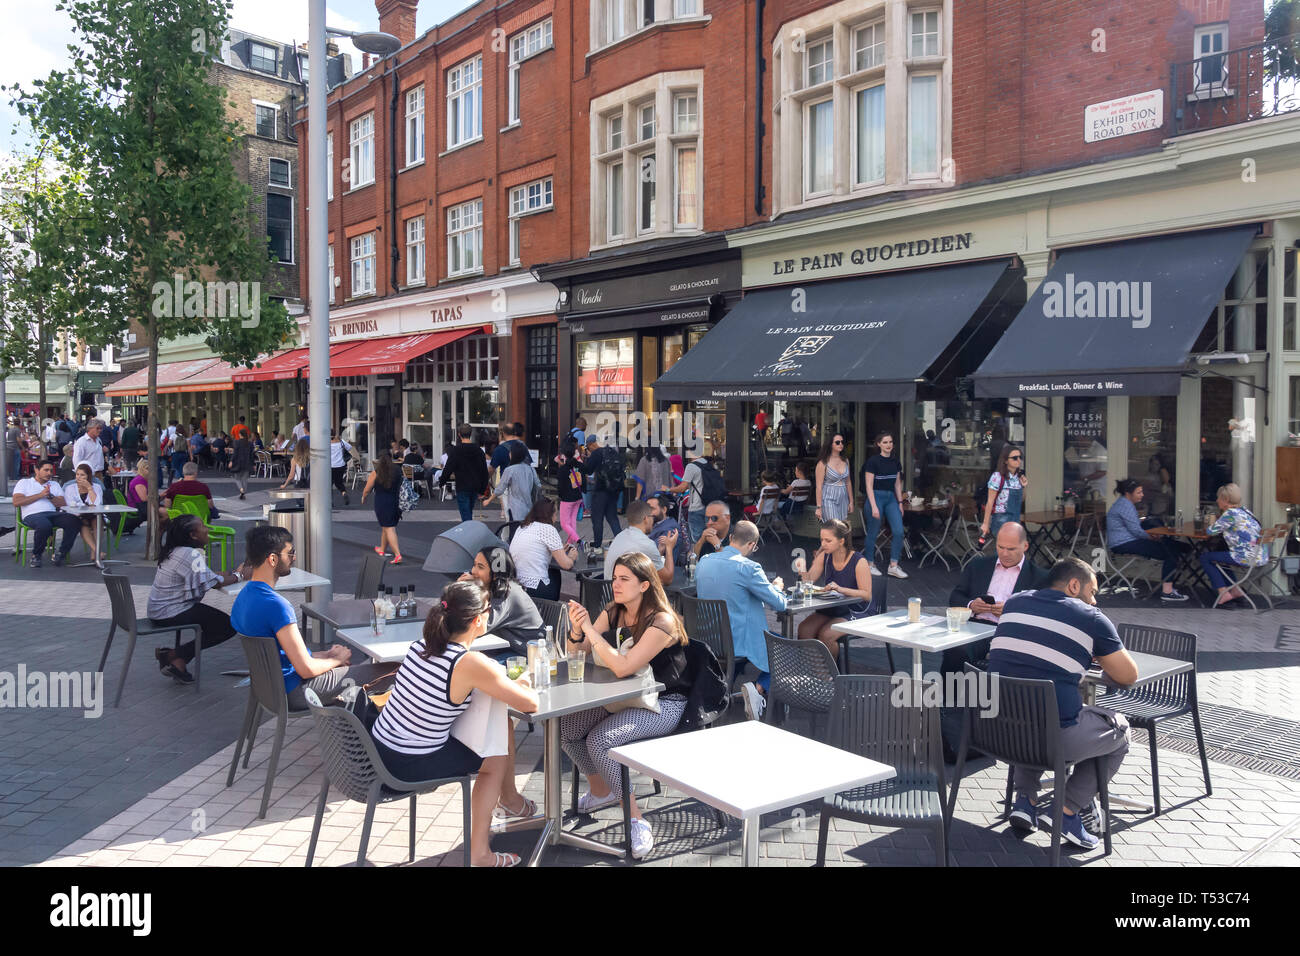 Outdoor dinning, Exhibition Road, South Kensington, Royal Borough of Kensington and Chelsea, Greater London, England, United Kingdom Stock Photo